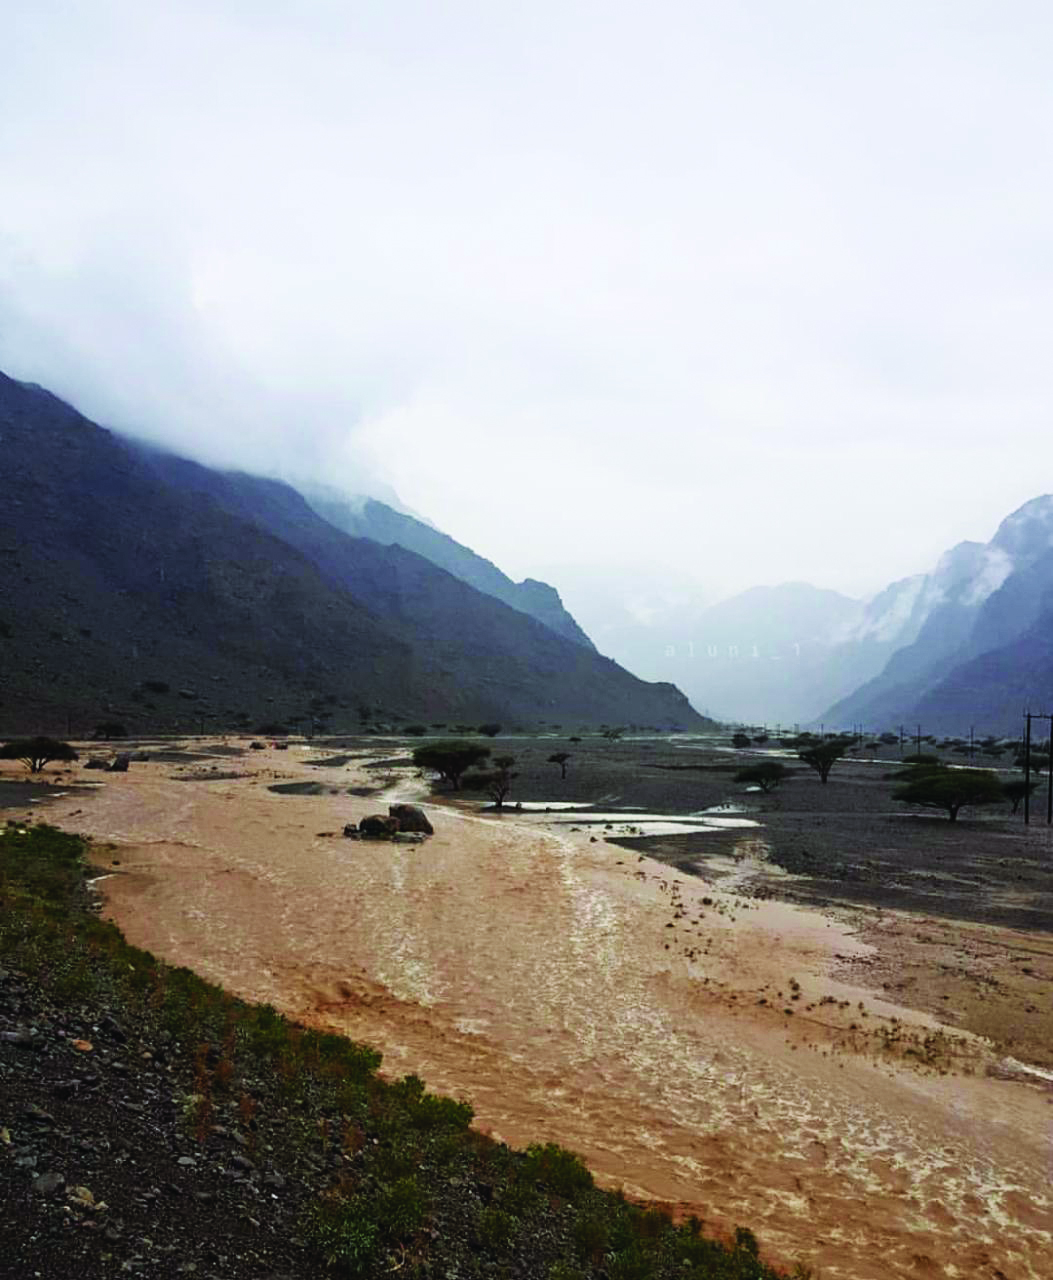 Rain hits parts of Oman, people told to avoid the wadis as more expected